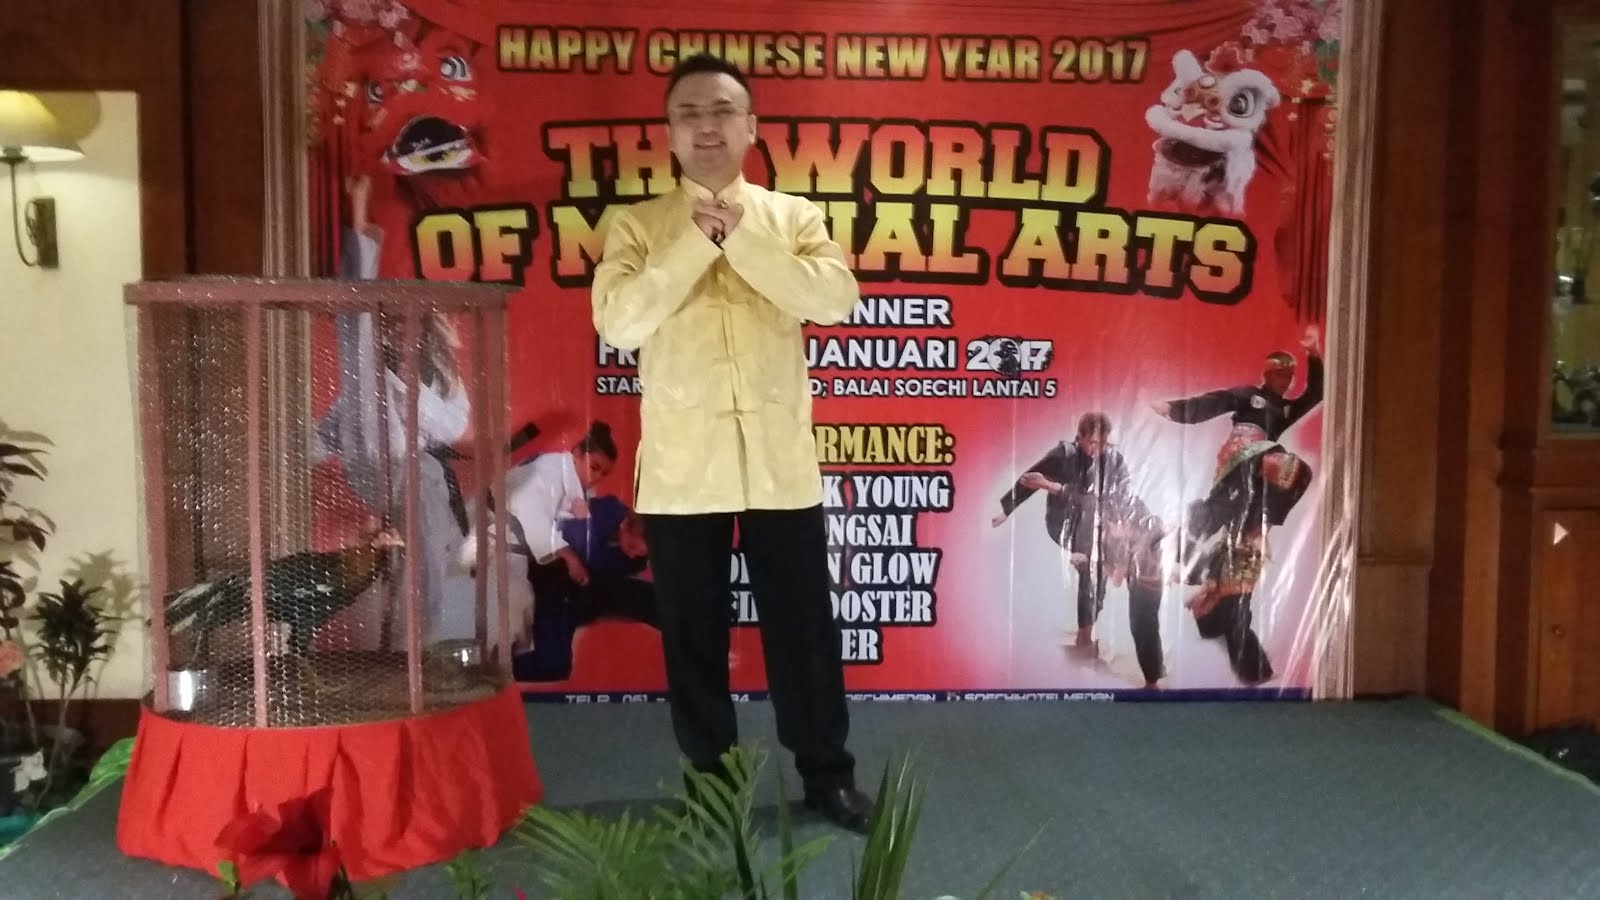 MC at CHINESE NEW YEAR - THE WORLD OF MARTIAL ARTS